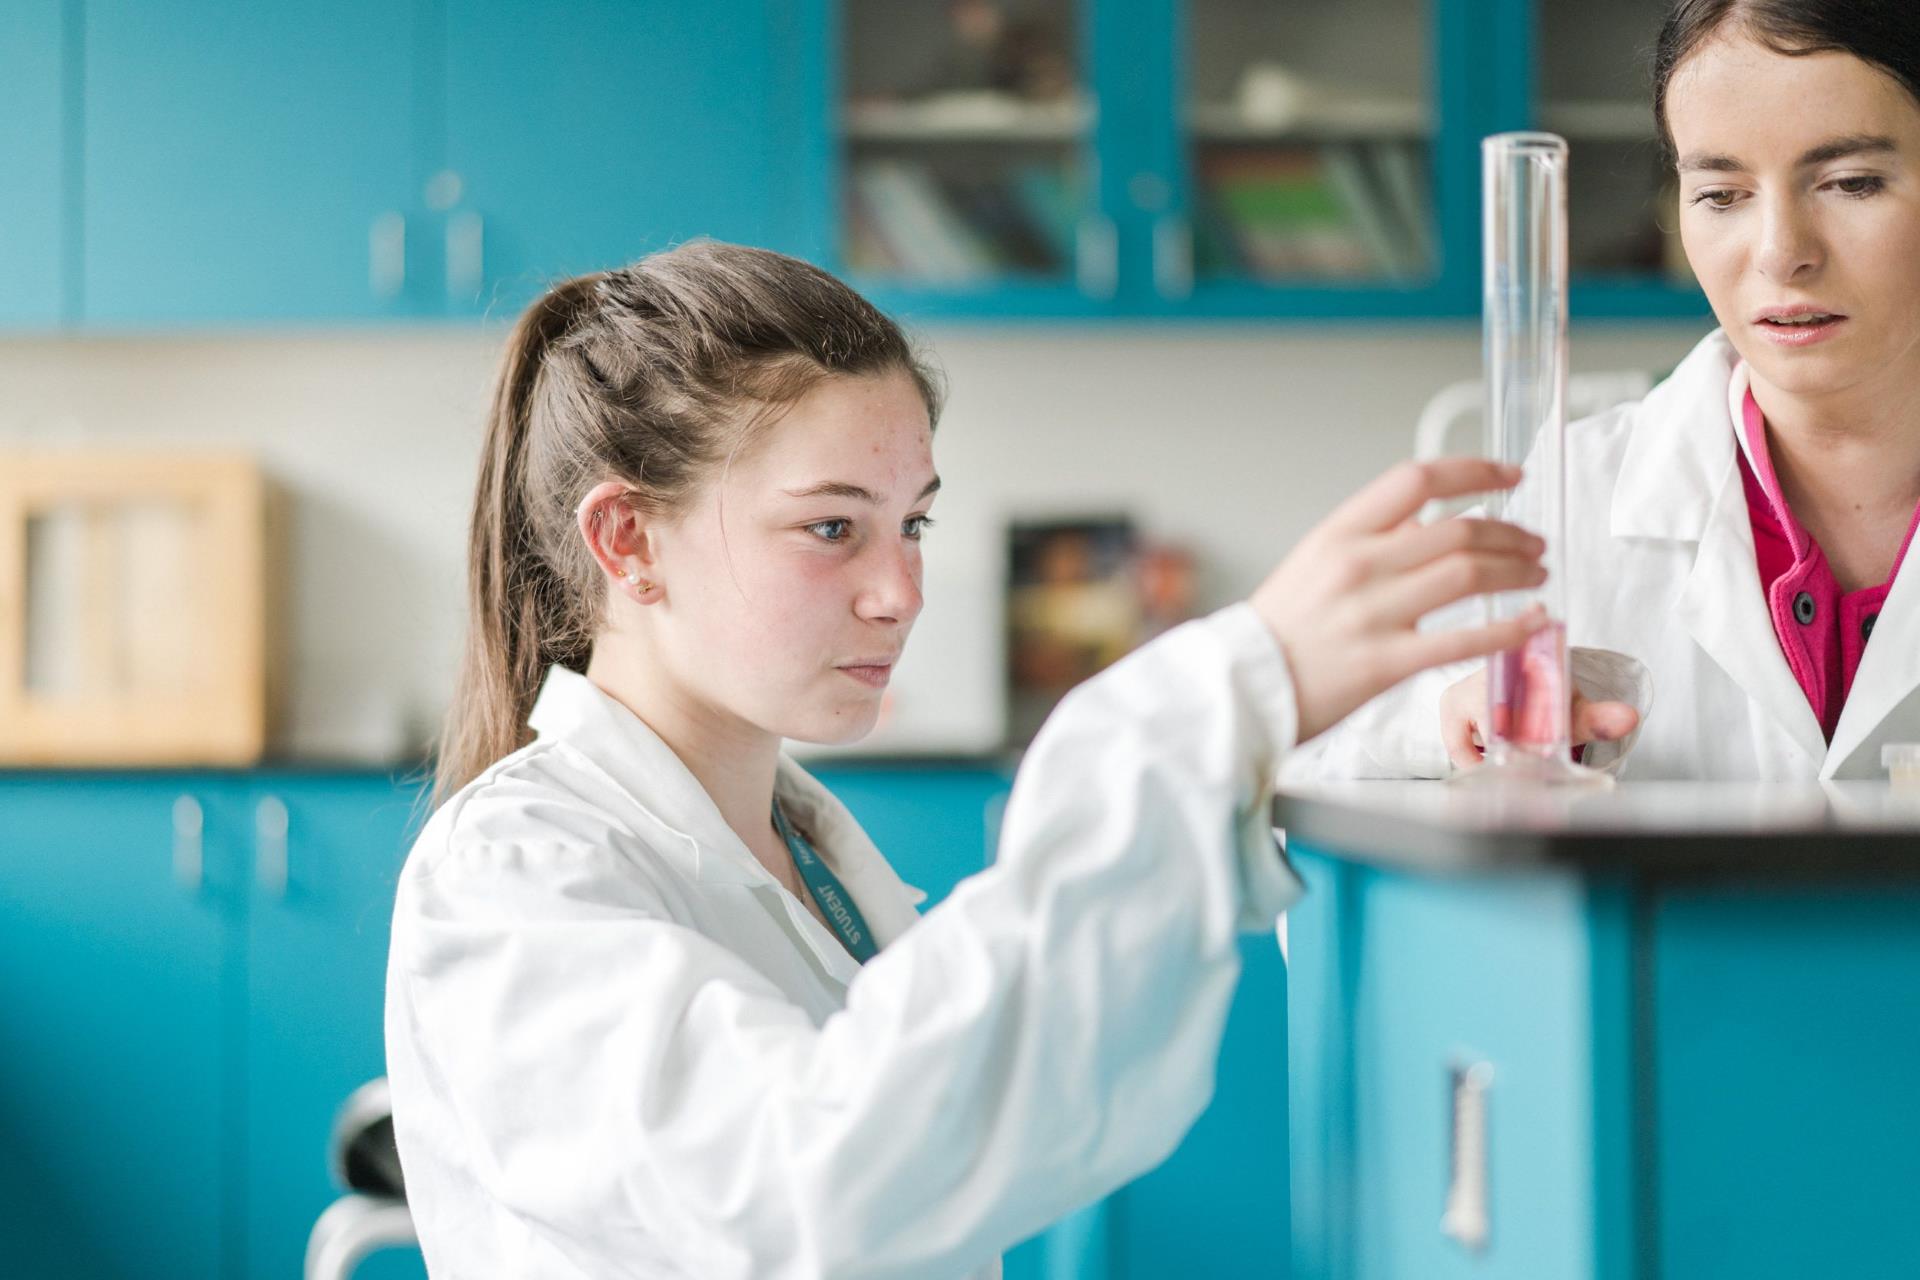 Harrogate College science student holding a test tube with chemicals